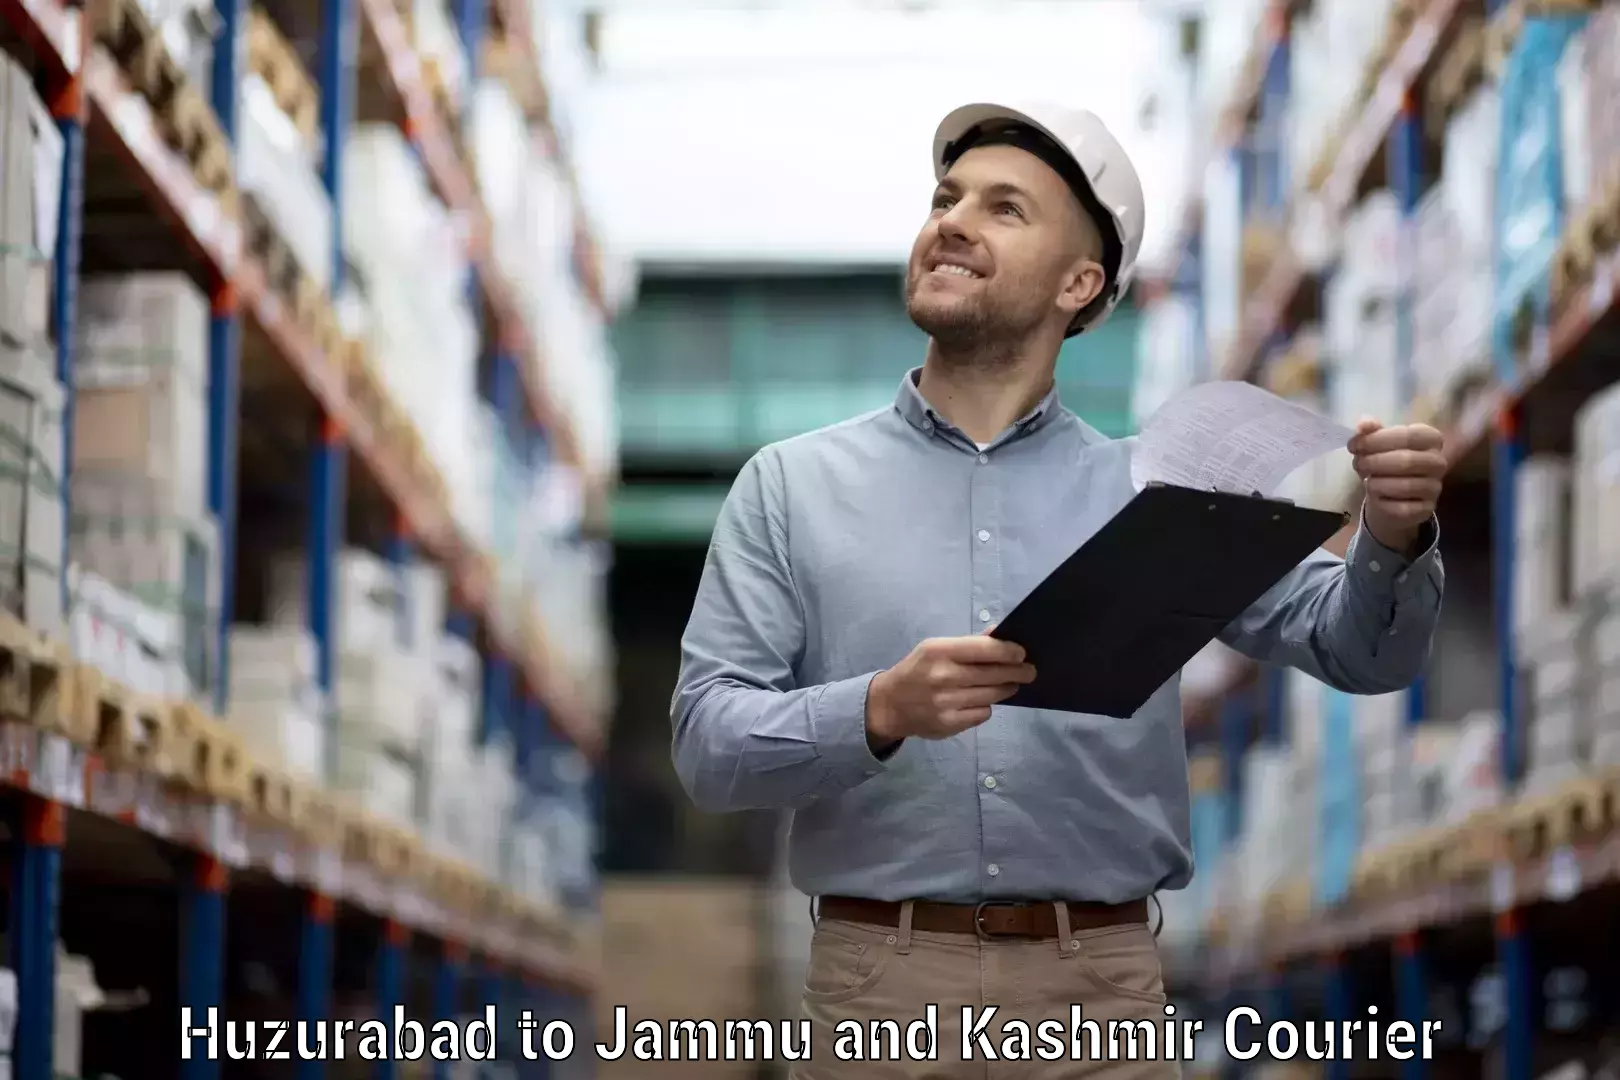 State-of-the-art courier technology Huzurabad to Rajouri